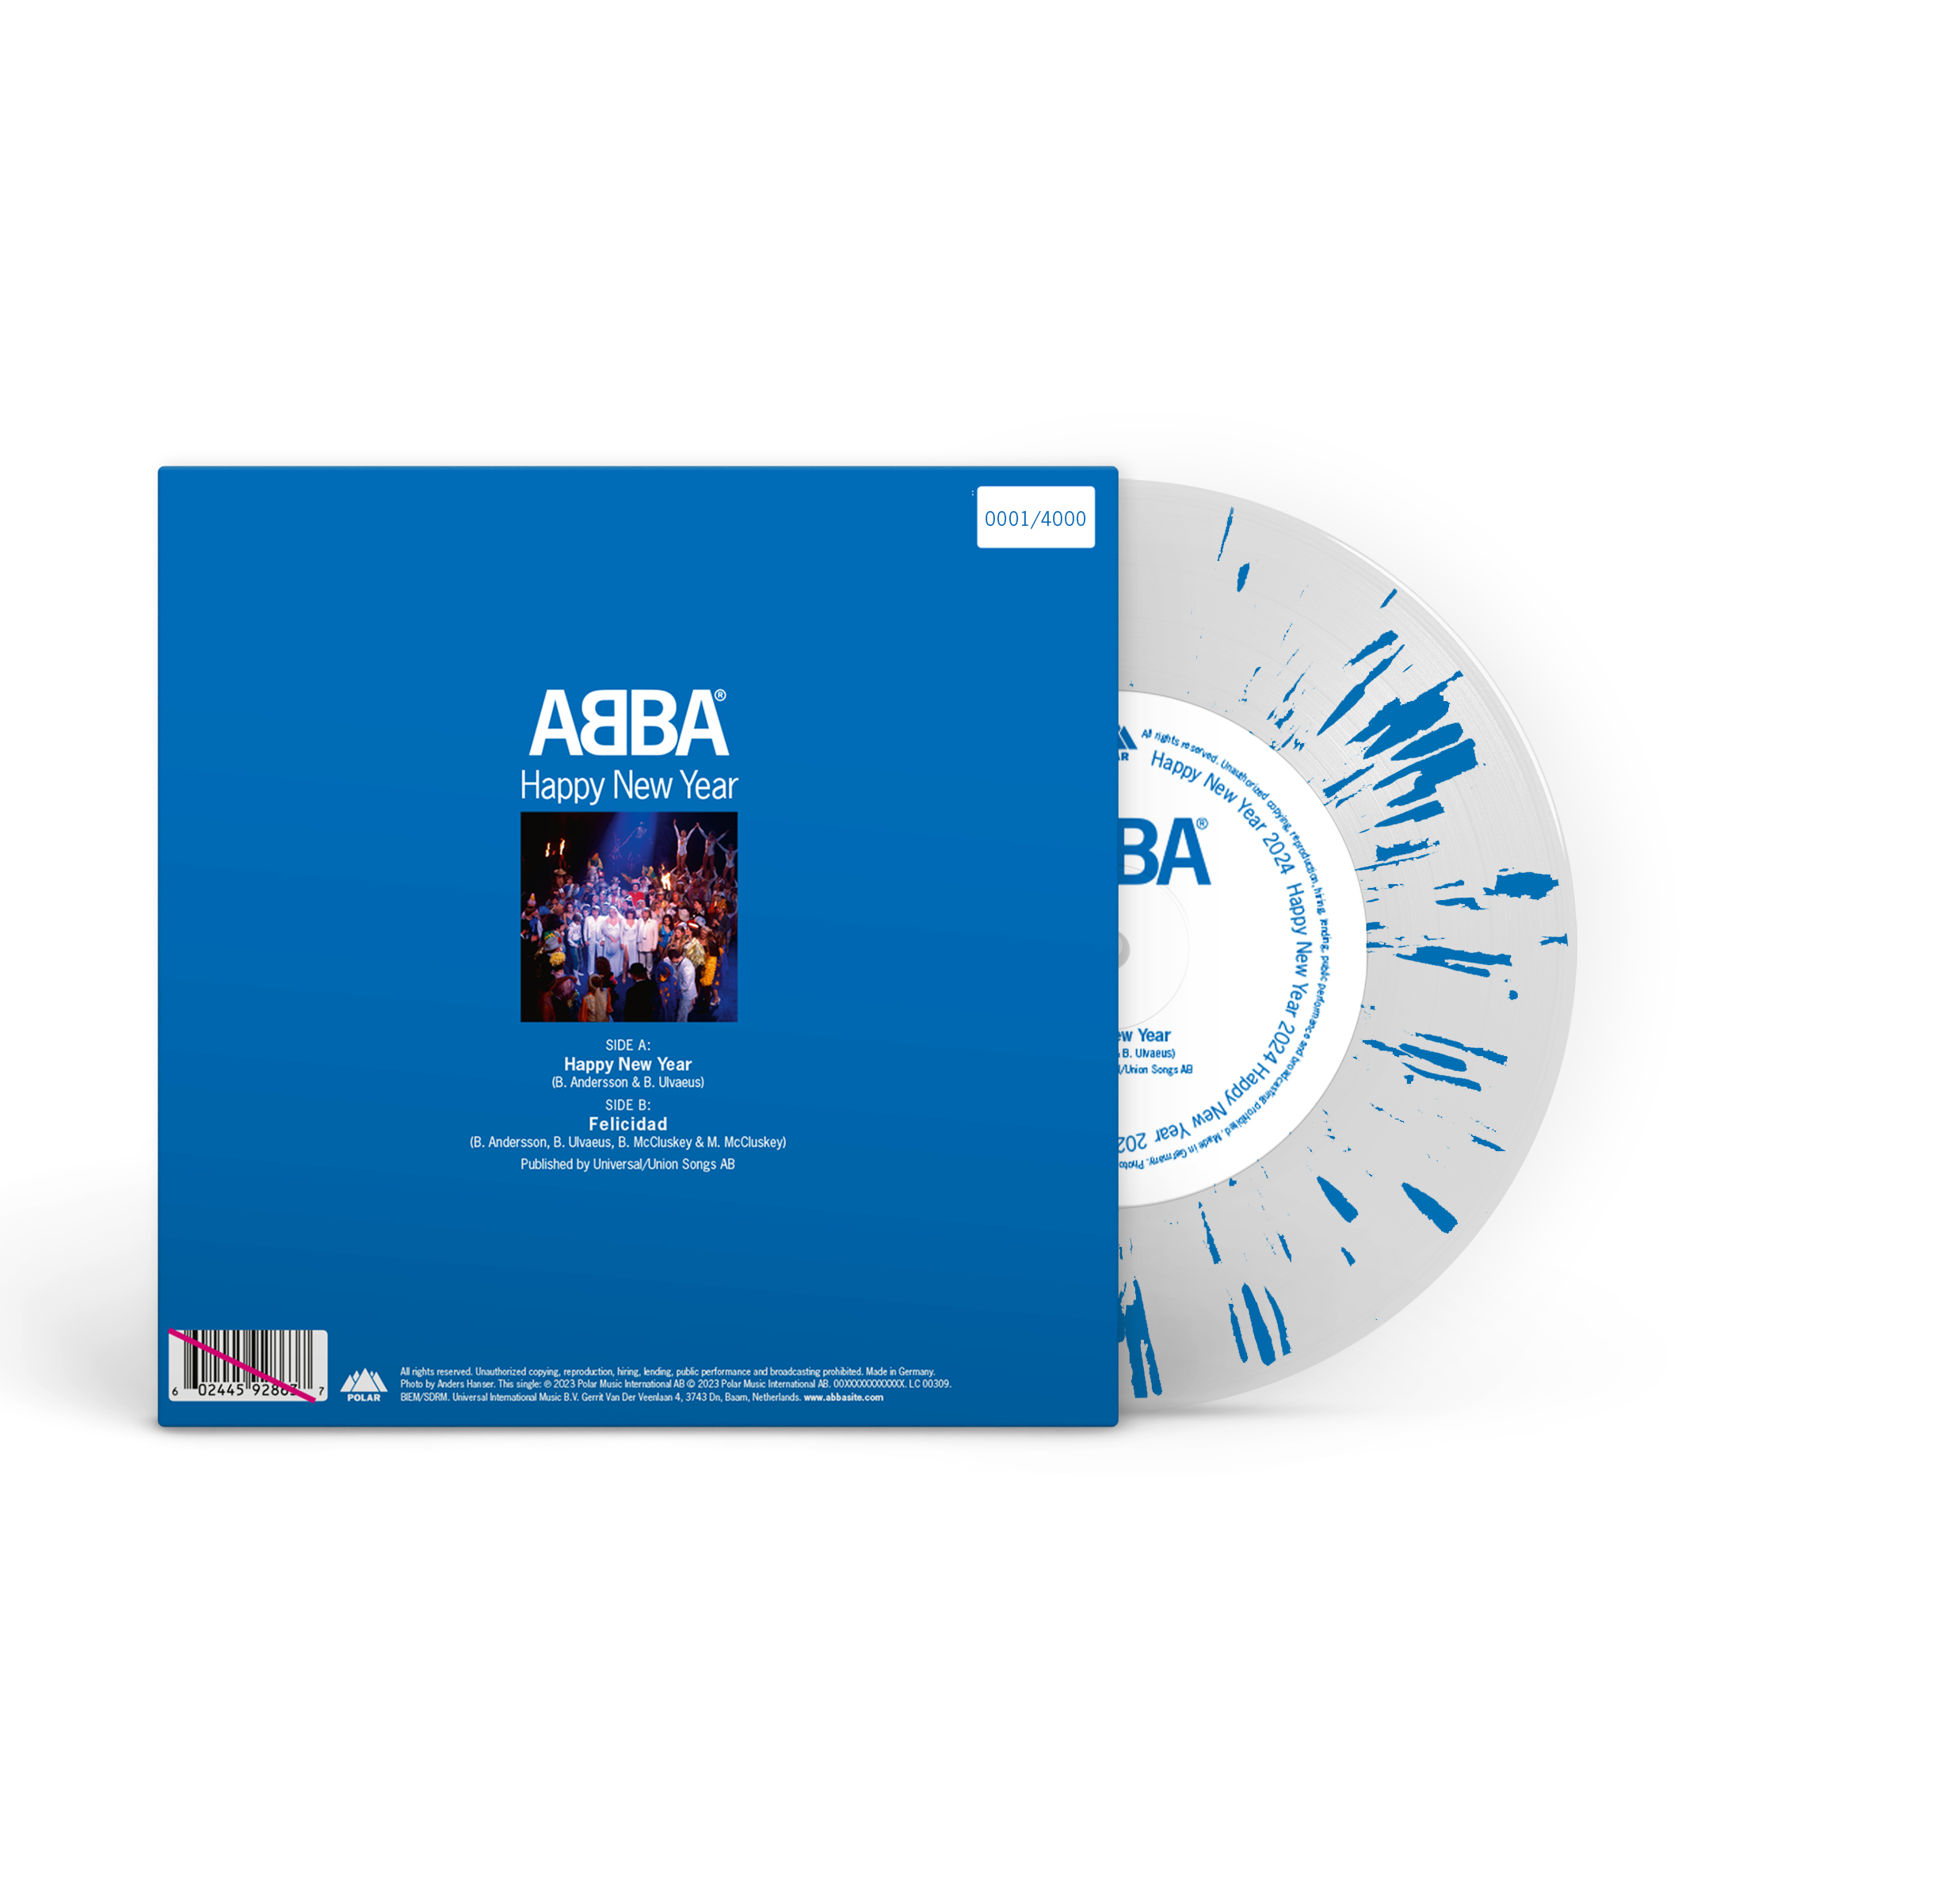 ABBA - Happy New Year (2024): Limited White/Blue Vinyl 7" Single